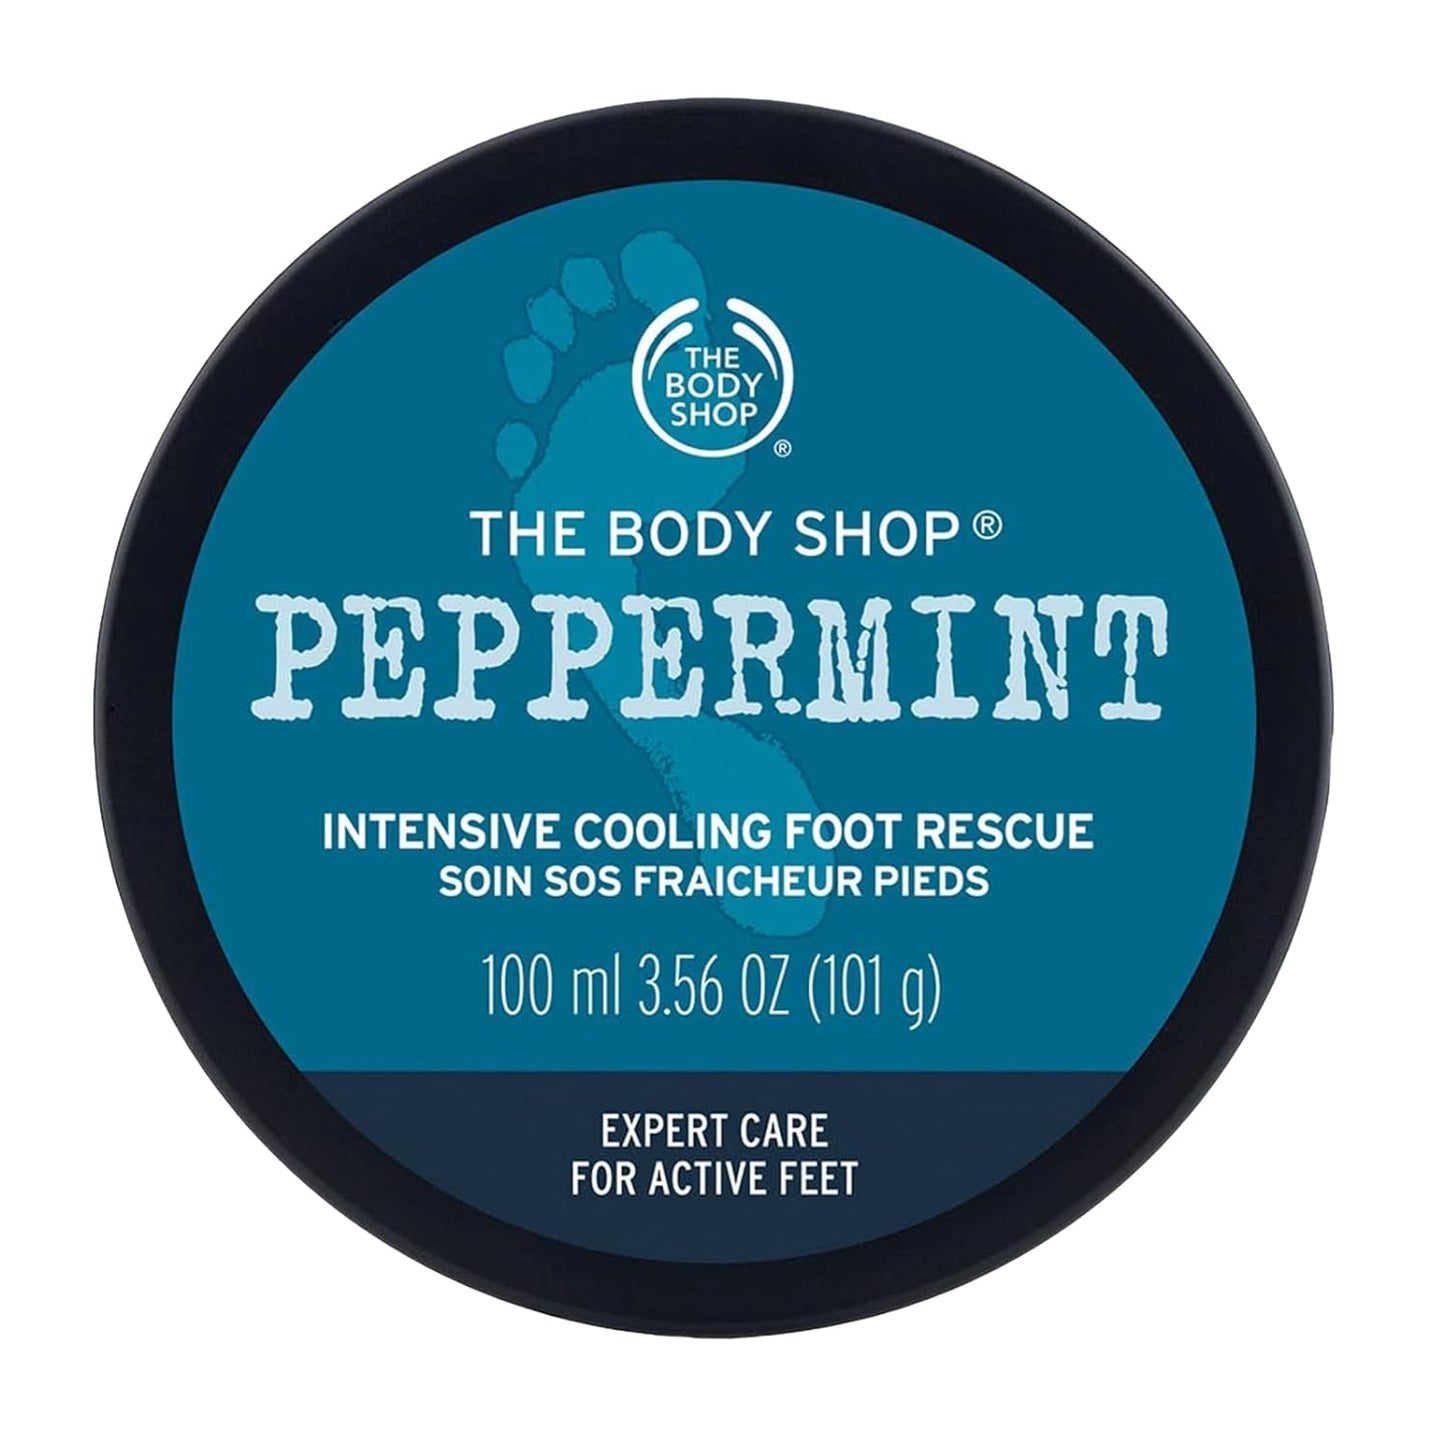 The Body Shop Peppermint Intensive Cooling Foot Rescue (100ml)